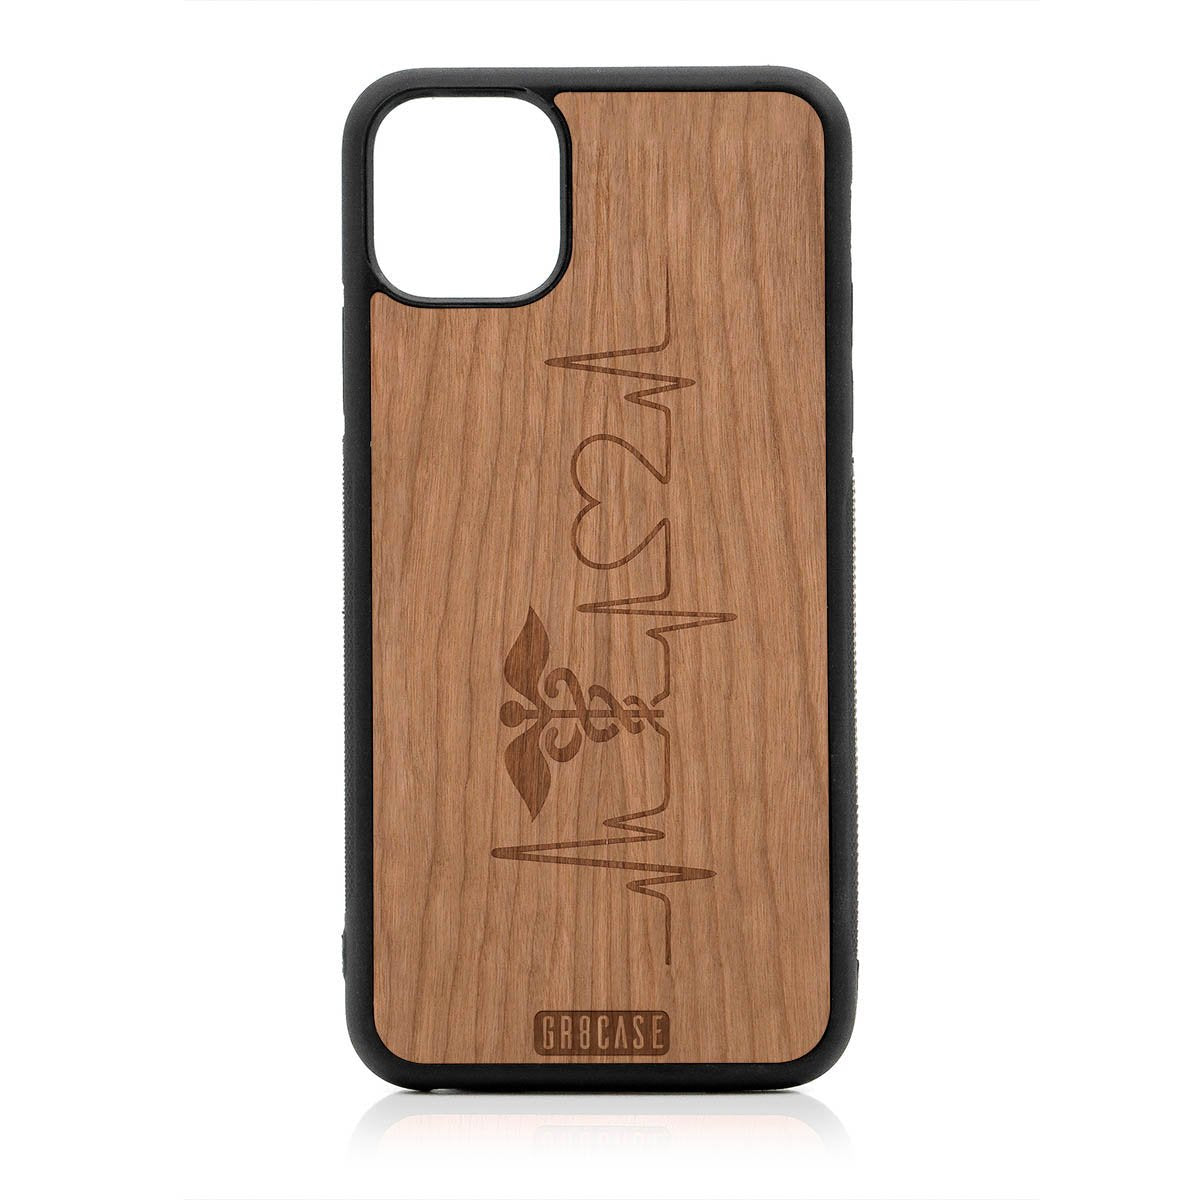 Hero's Heart (Nurse, Doctor) Design Wood Case For iPhone 11 Pro Max by GR8CASE